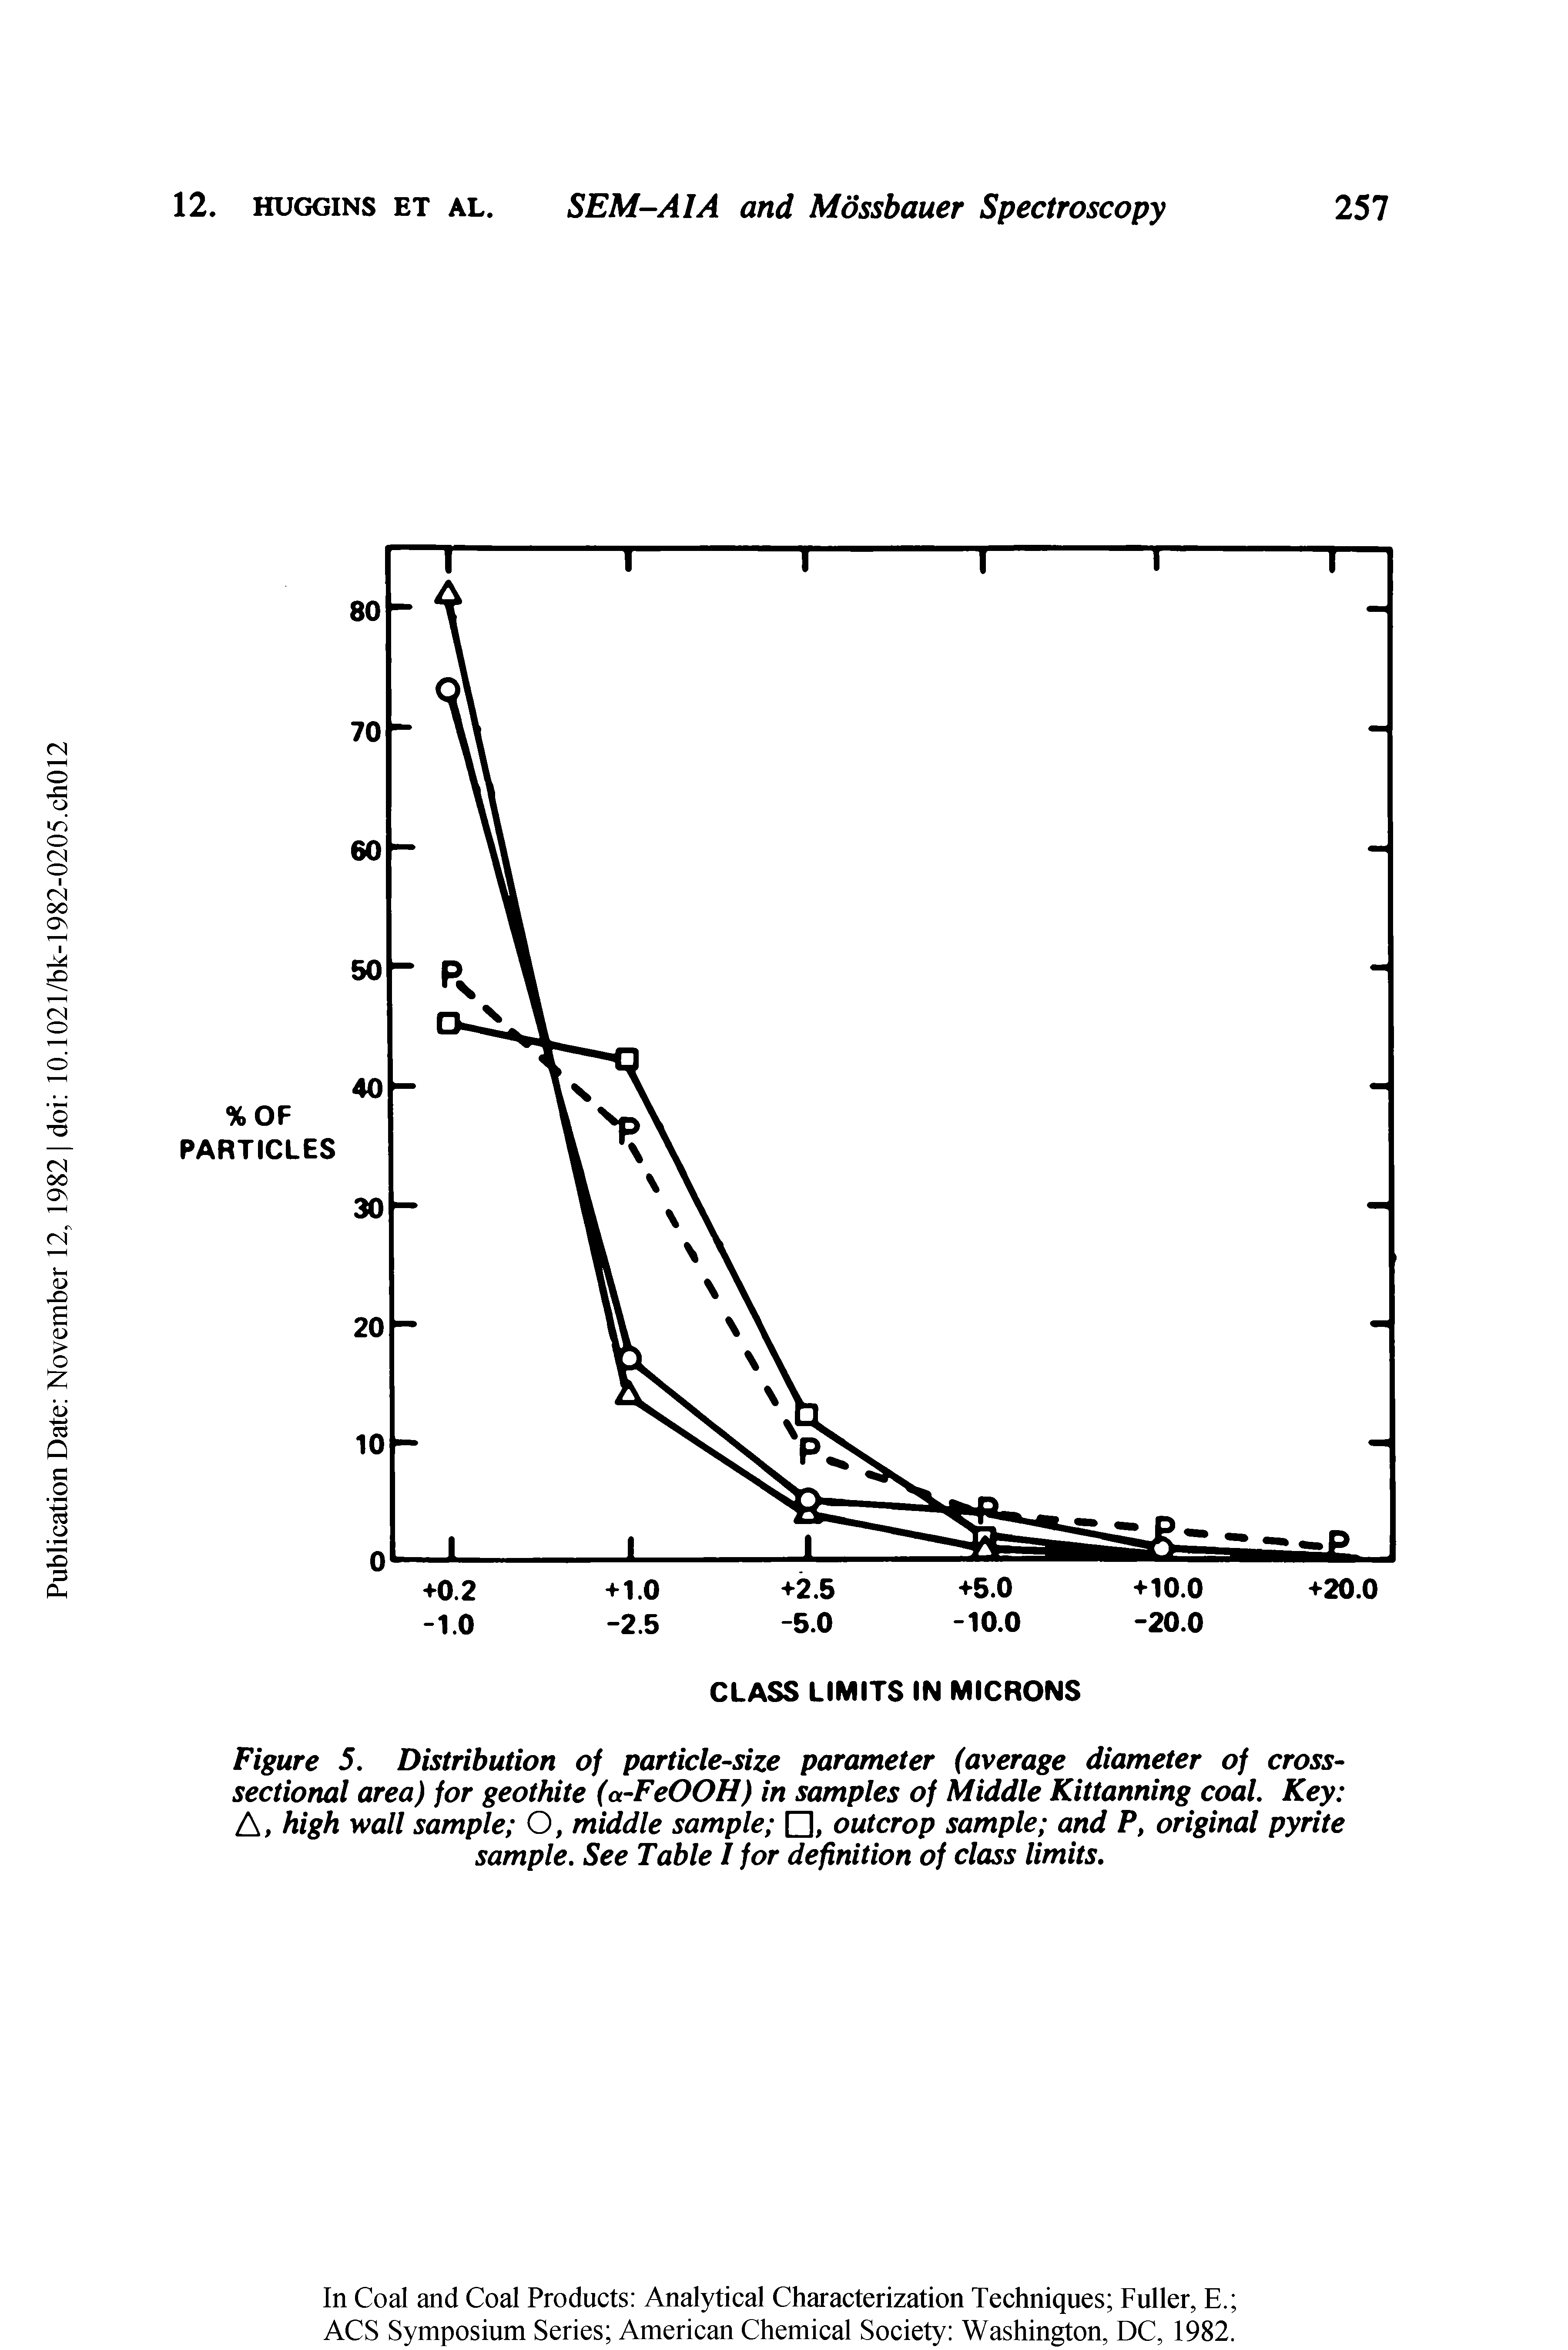 Figure 5. Distribution of particle-size parameter (average diameter of cross-sectional area) for geothite (a-FeOOH) in samples of Middle Kittanning coal. Key A, high wall sample O, middle sample , outcrop sample and P, original pyrite sample. See Table / for definition of class limits.